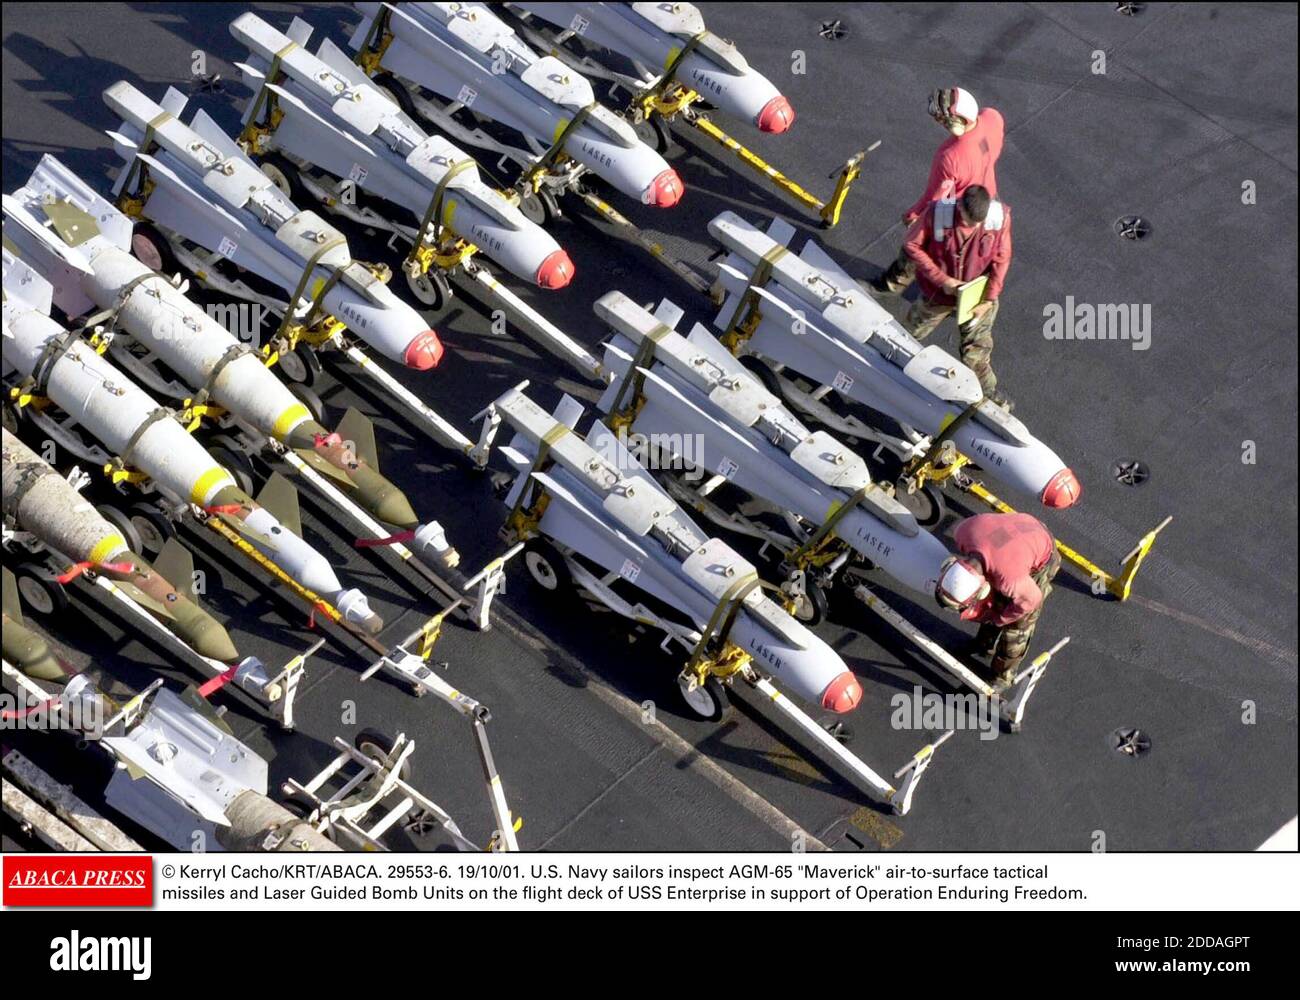 NO FILM, NO VIDEO, NO TV, NO DOCUMENTARY - © Kerryl Cacho/KRT/ABACA. 29553-6. 19/10/01. U.S. Navy sailors inspect AGM-65 Maverick air-to-surface tactical missiles and Laser Guided Bomb Units on the flight deck of USS Enterprise in support of Operation Enduring Freedom. Stock Photo